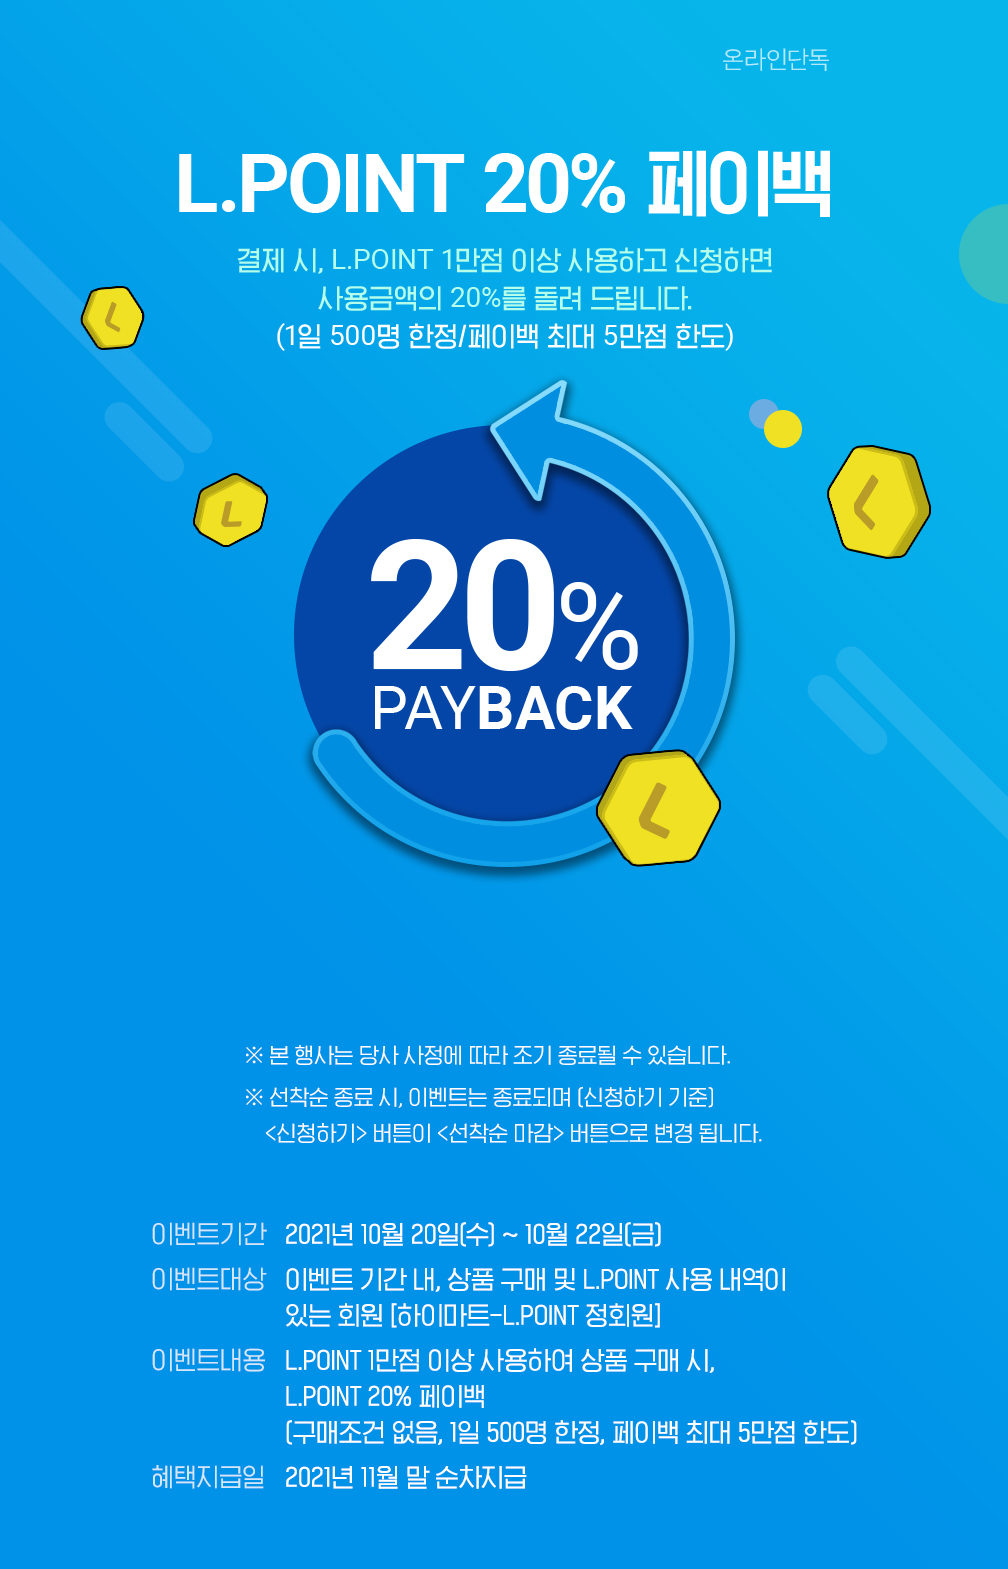 L.POINT 20% 페이백